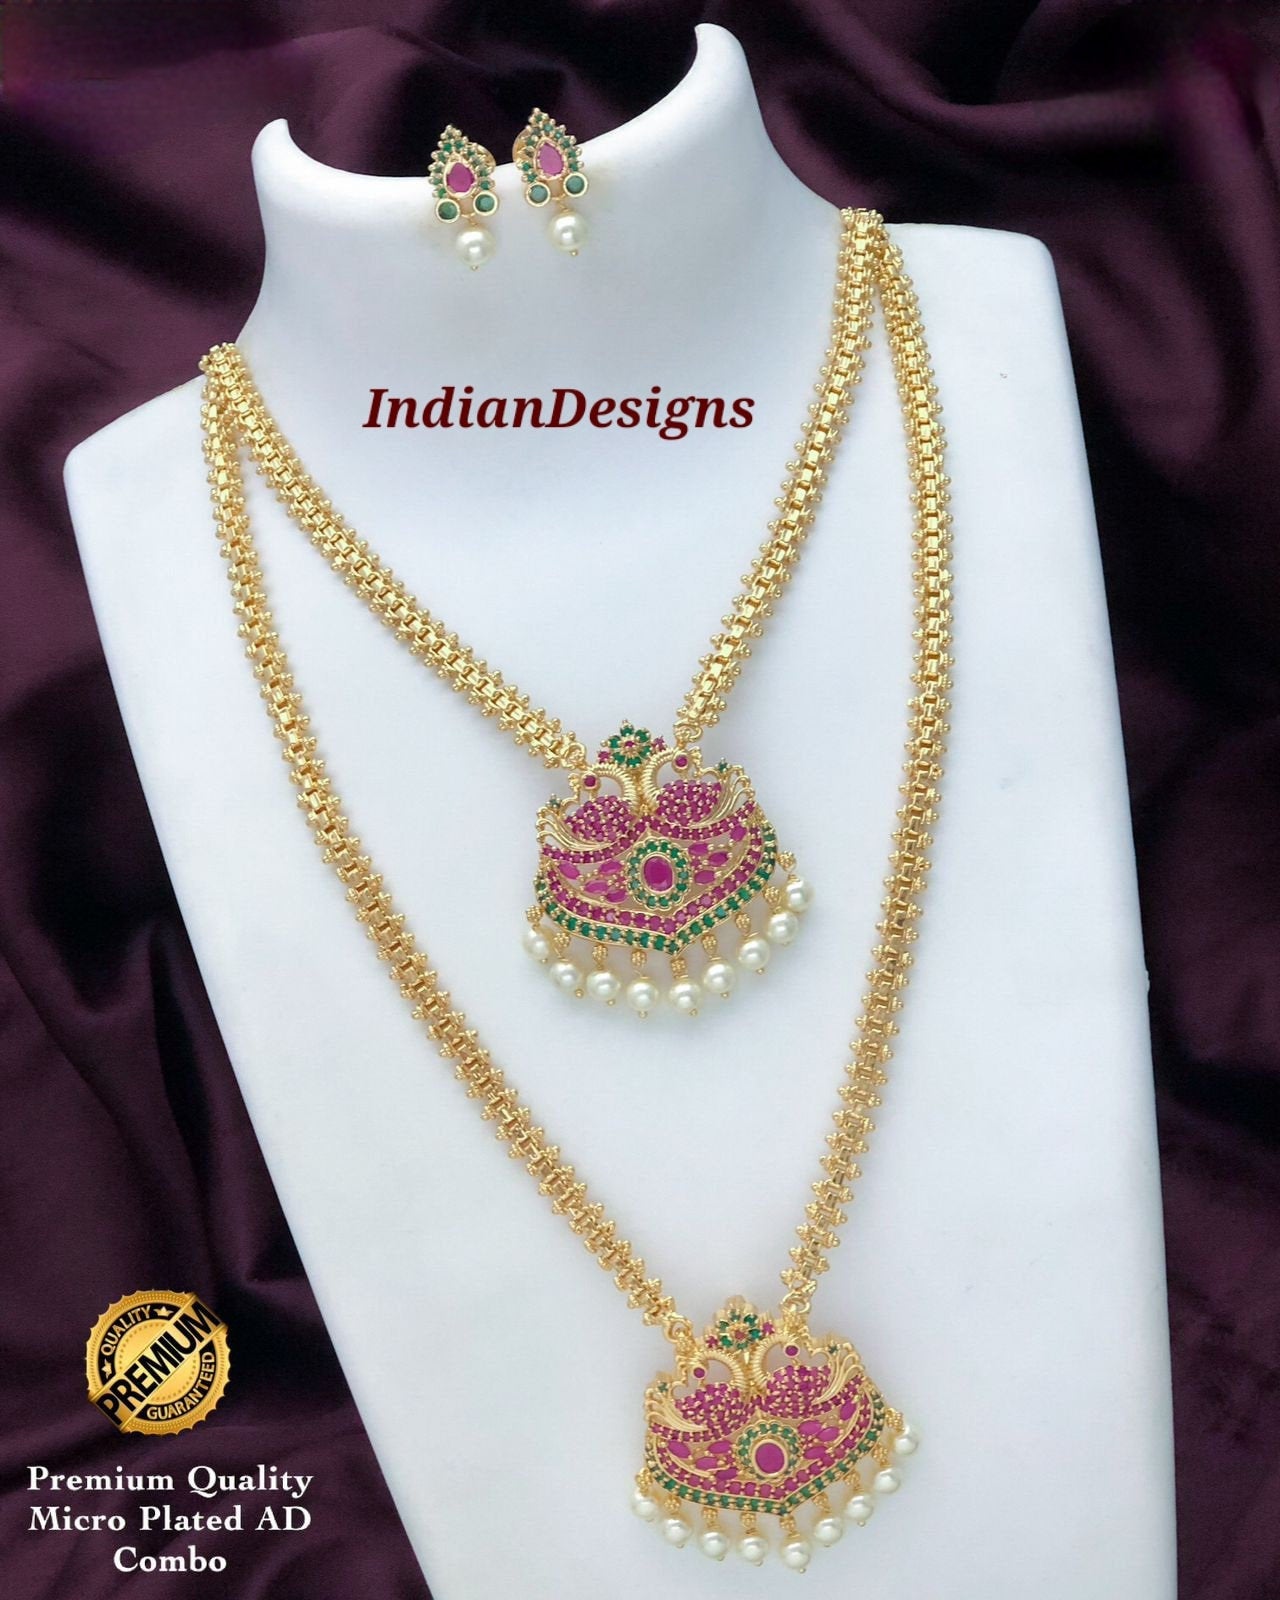 Indian 22K Gold Plated Wedding Fashionable Long Chain Necklace Earrings Set  ADA | eBay